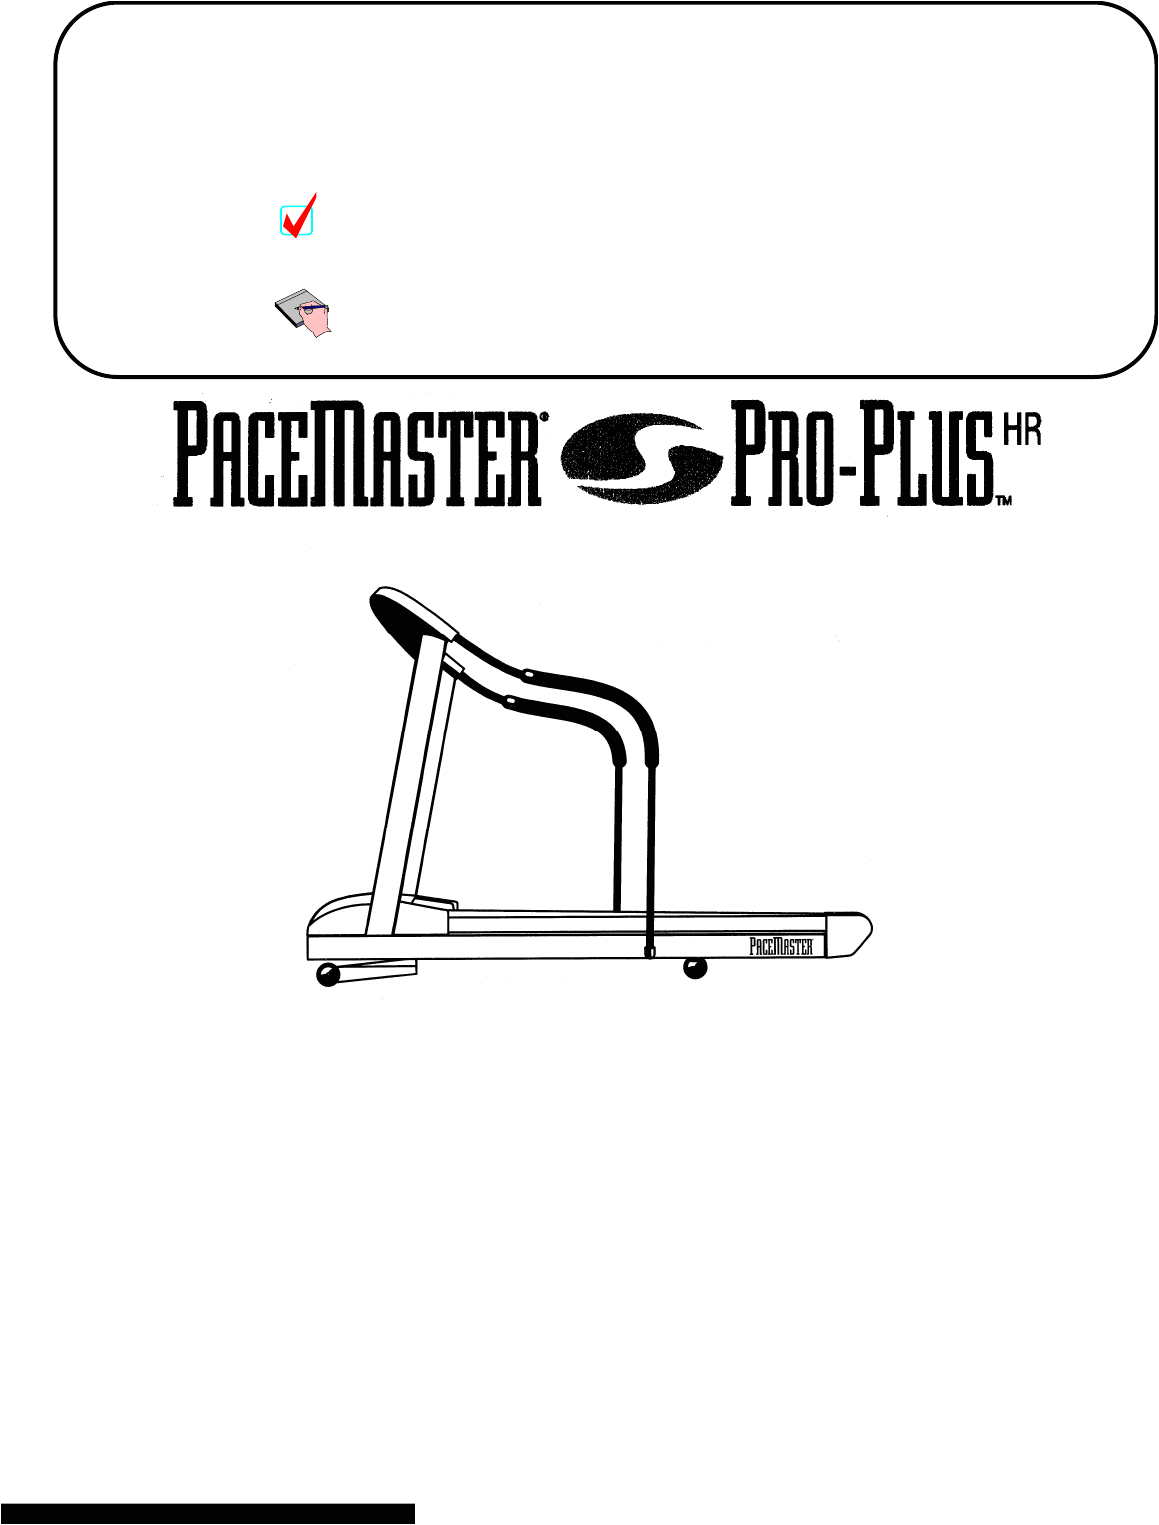 pacemaster pro plus hr manual 820292 manualslib makes it easy to find manuals online user